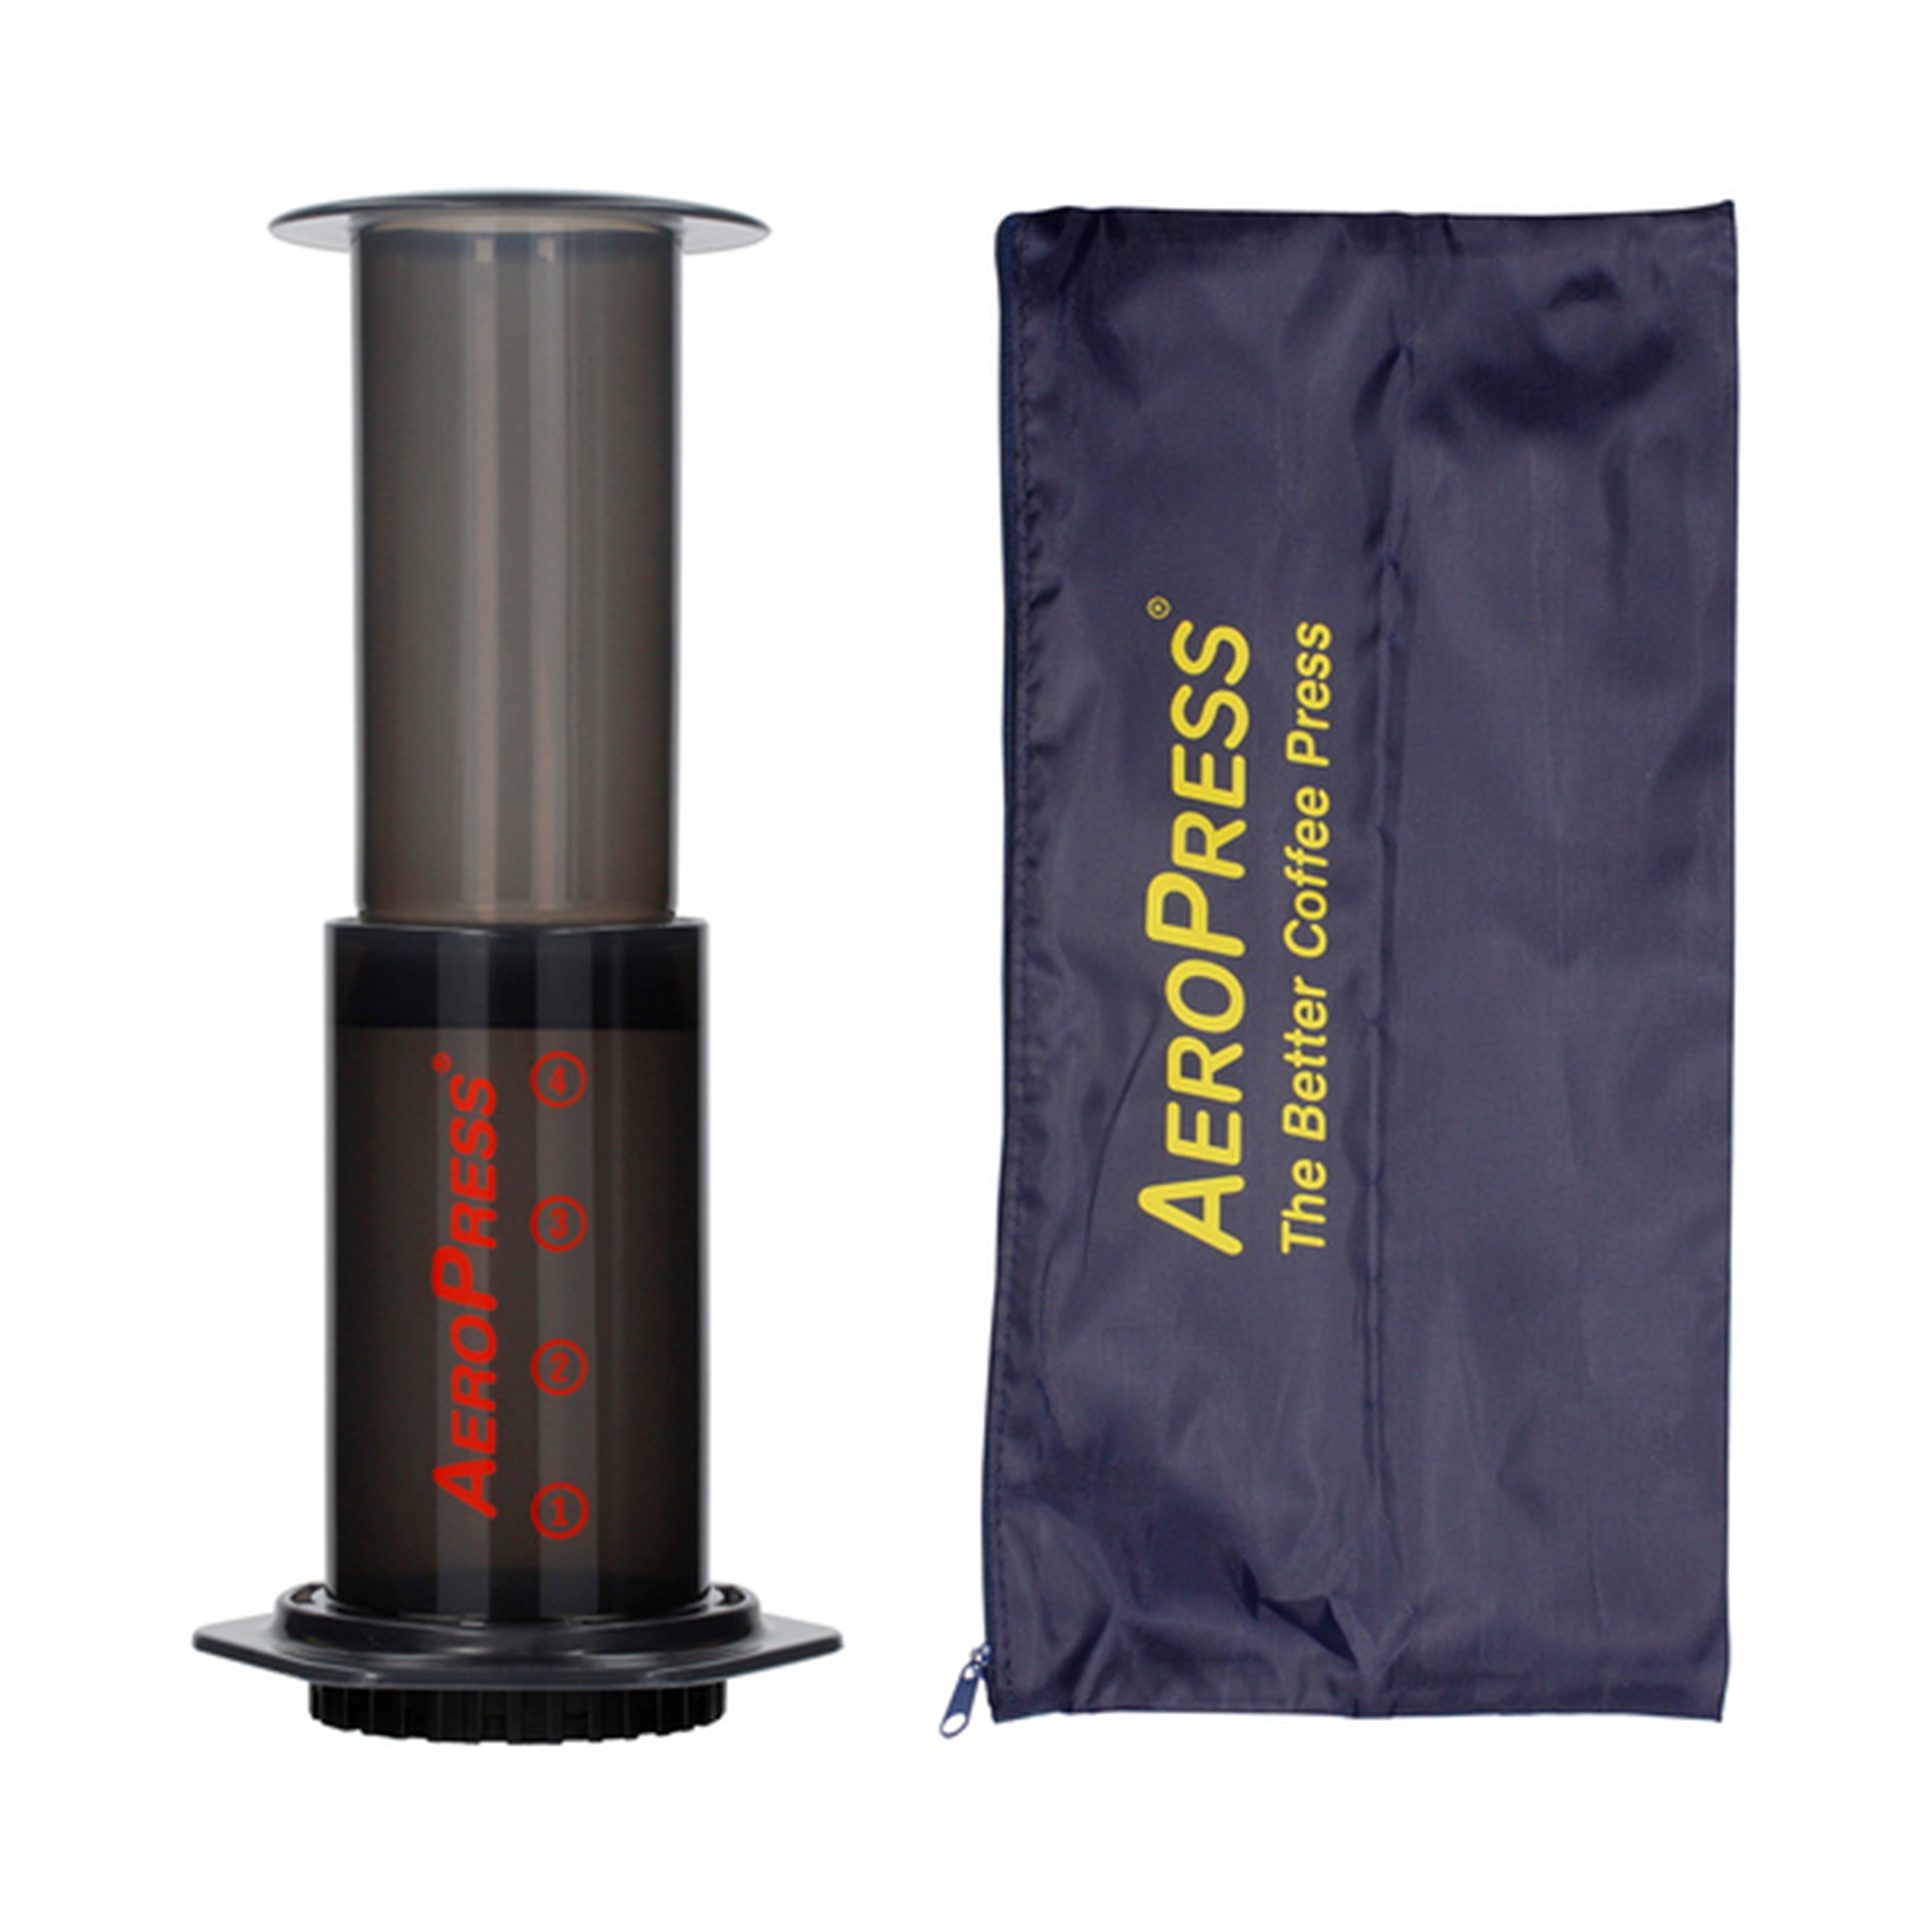 Aeropress® Coffee 1-4 cups (Set with a carrying bag)